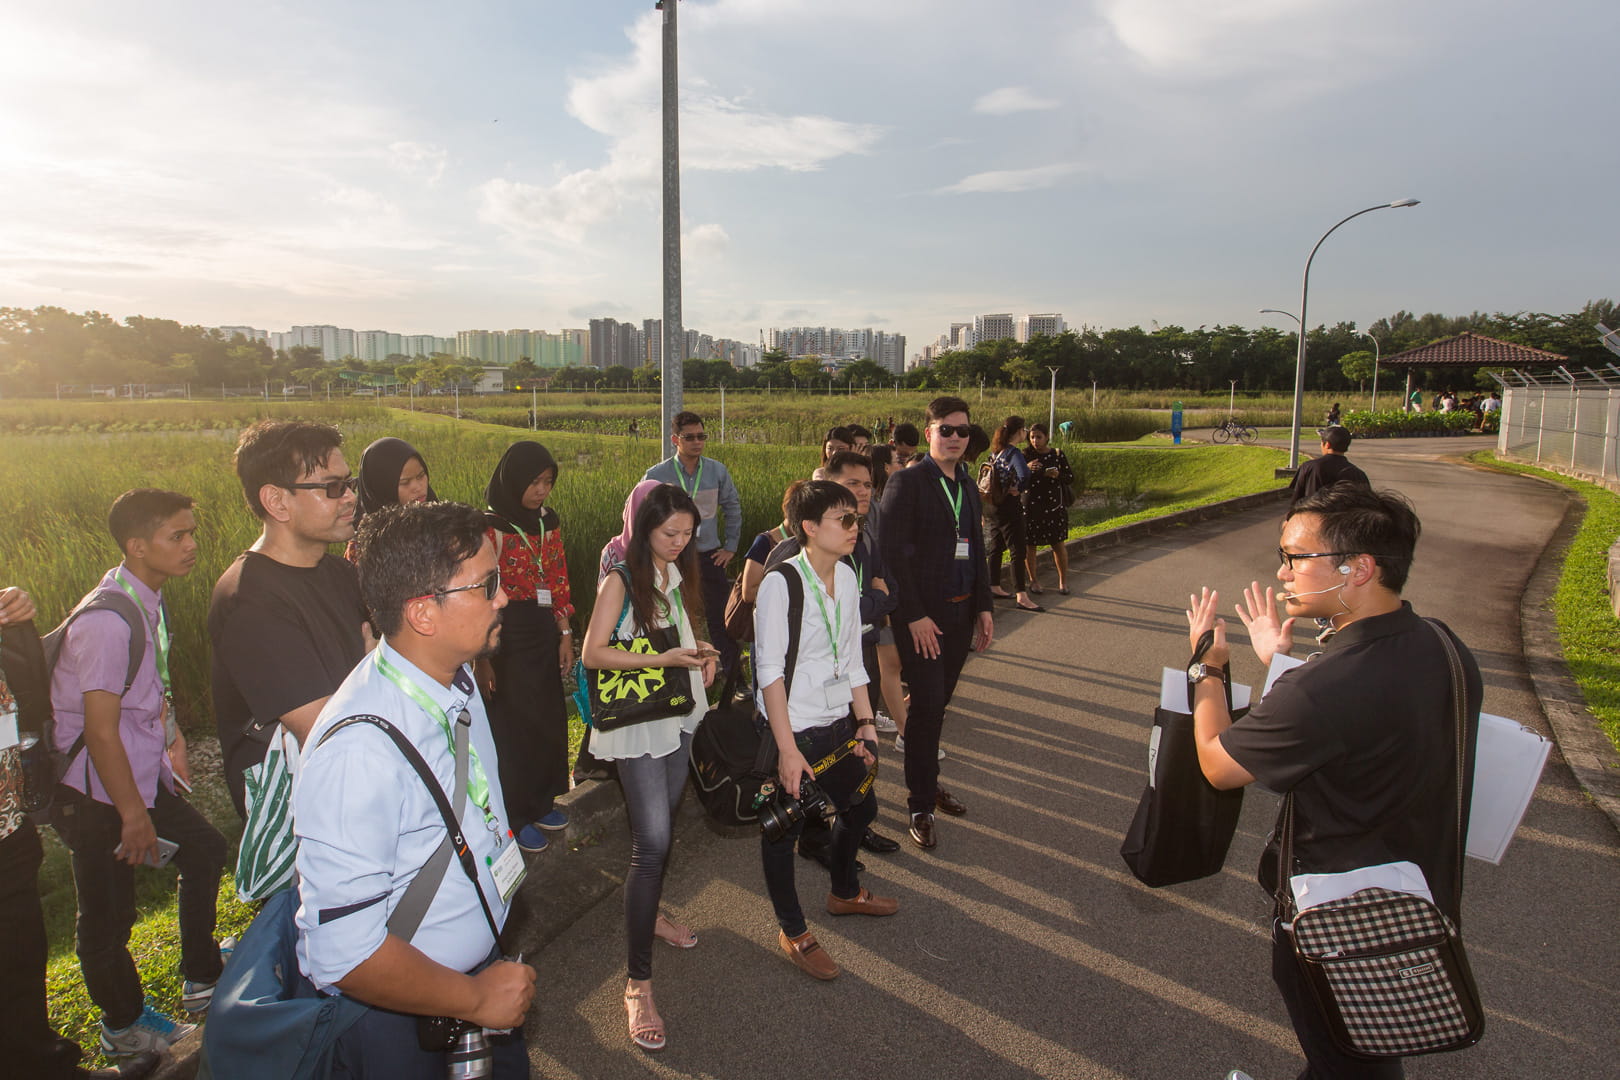 Participants taking in information about Singapore’s innovative approach to transforming a former landfill site into a park at Lorong Halus Wetlands